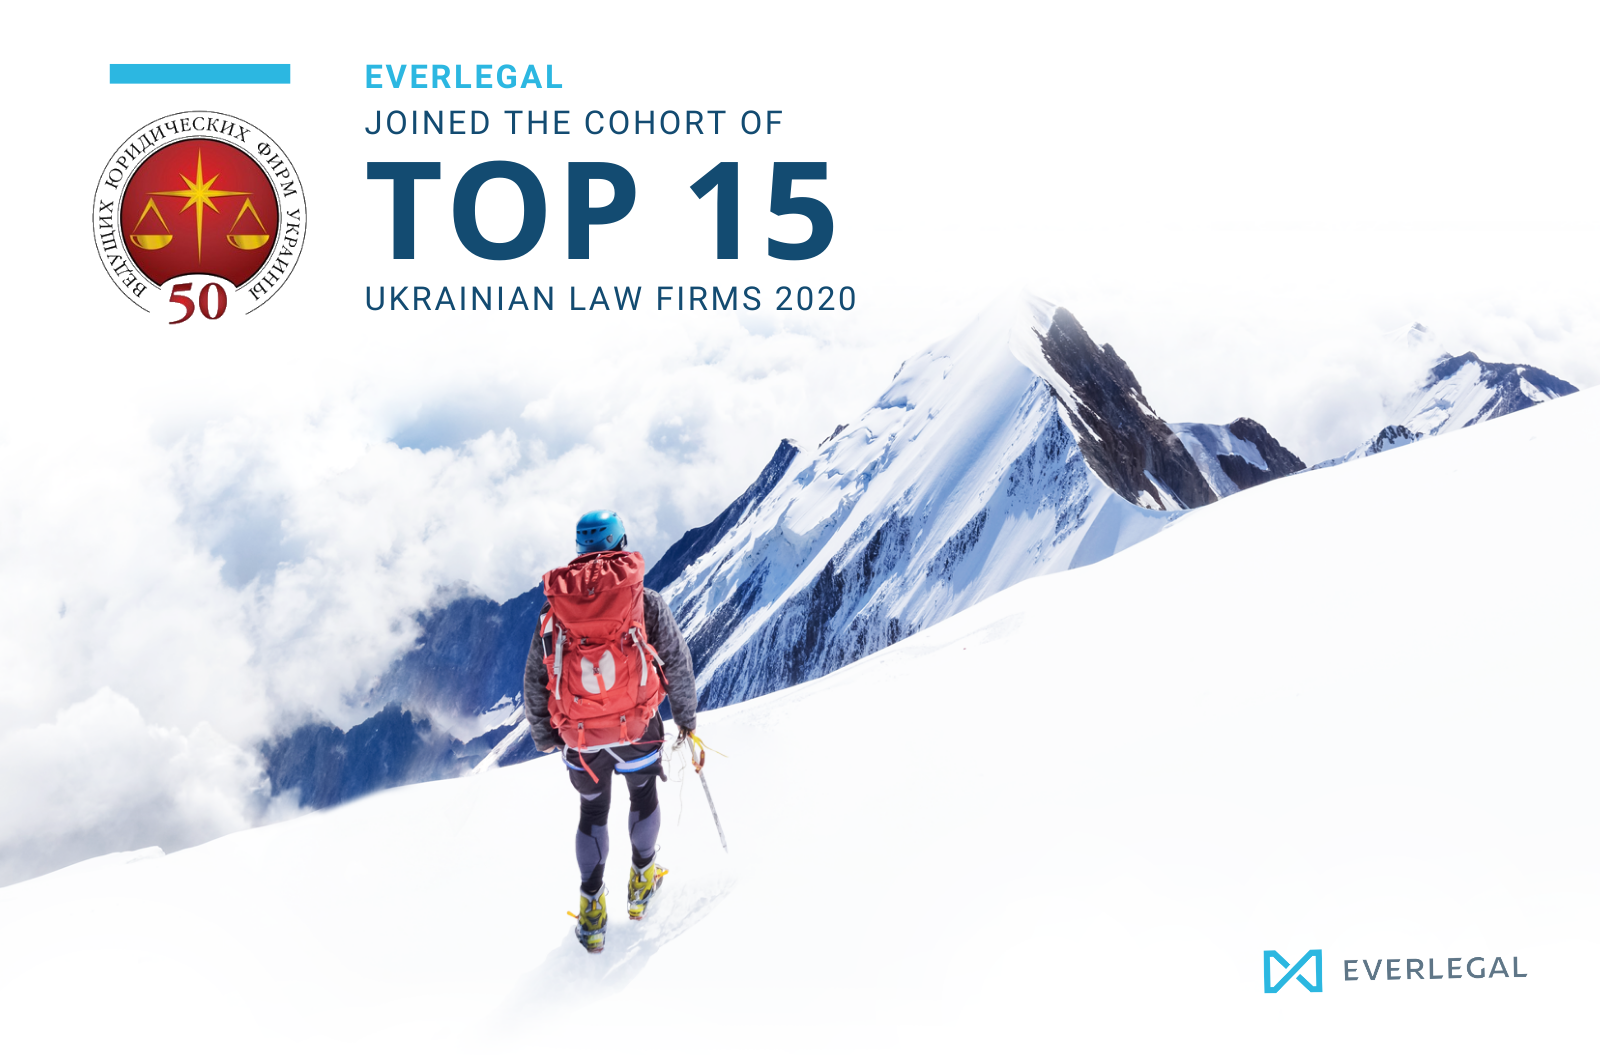 EVERLEGAL is a TOP 15 Ukrainian Law Firm 2020